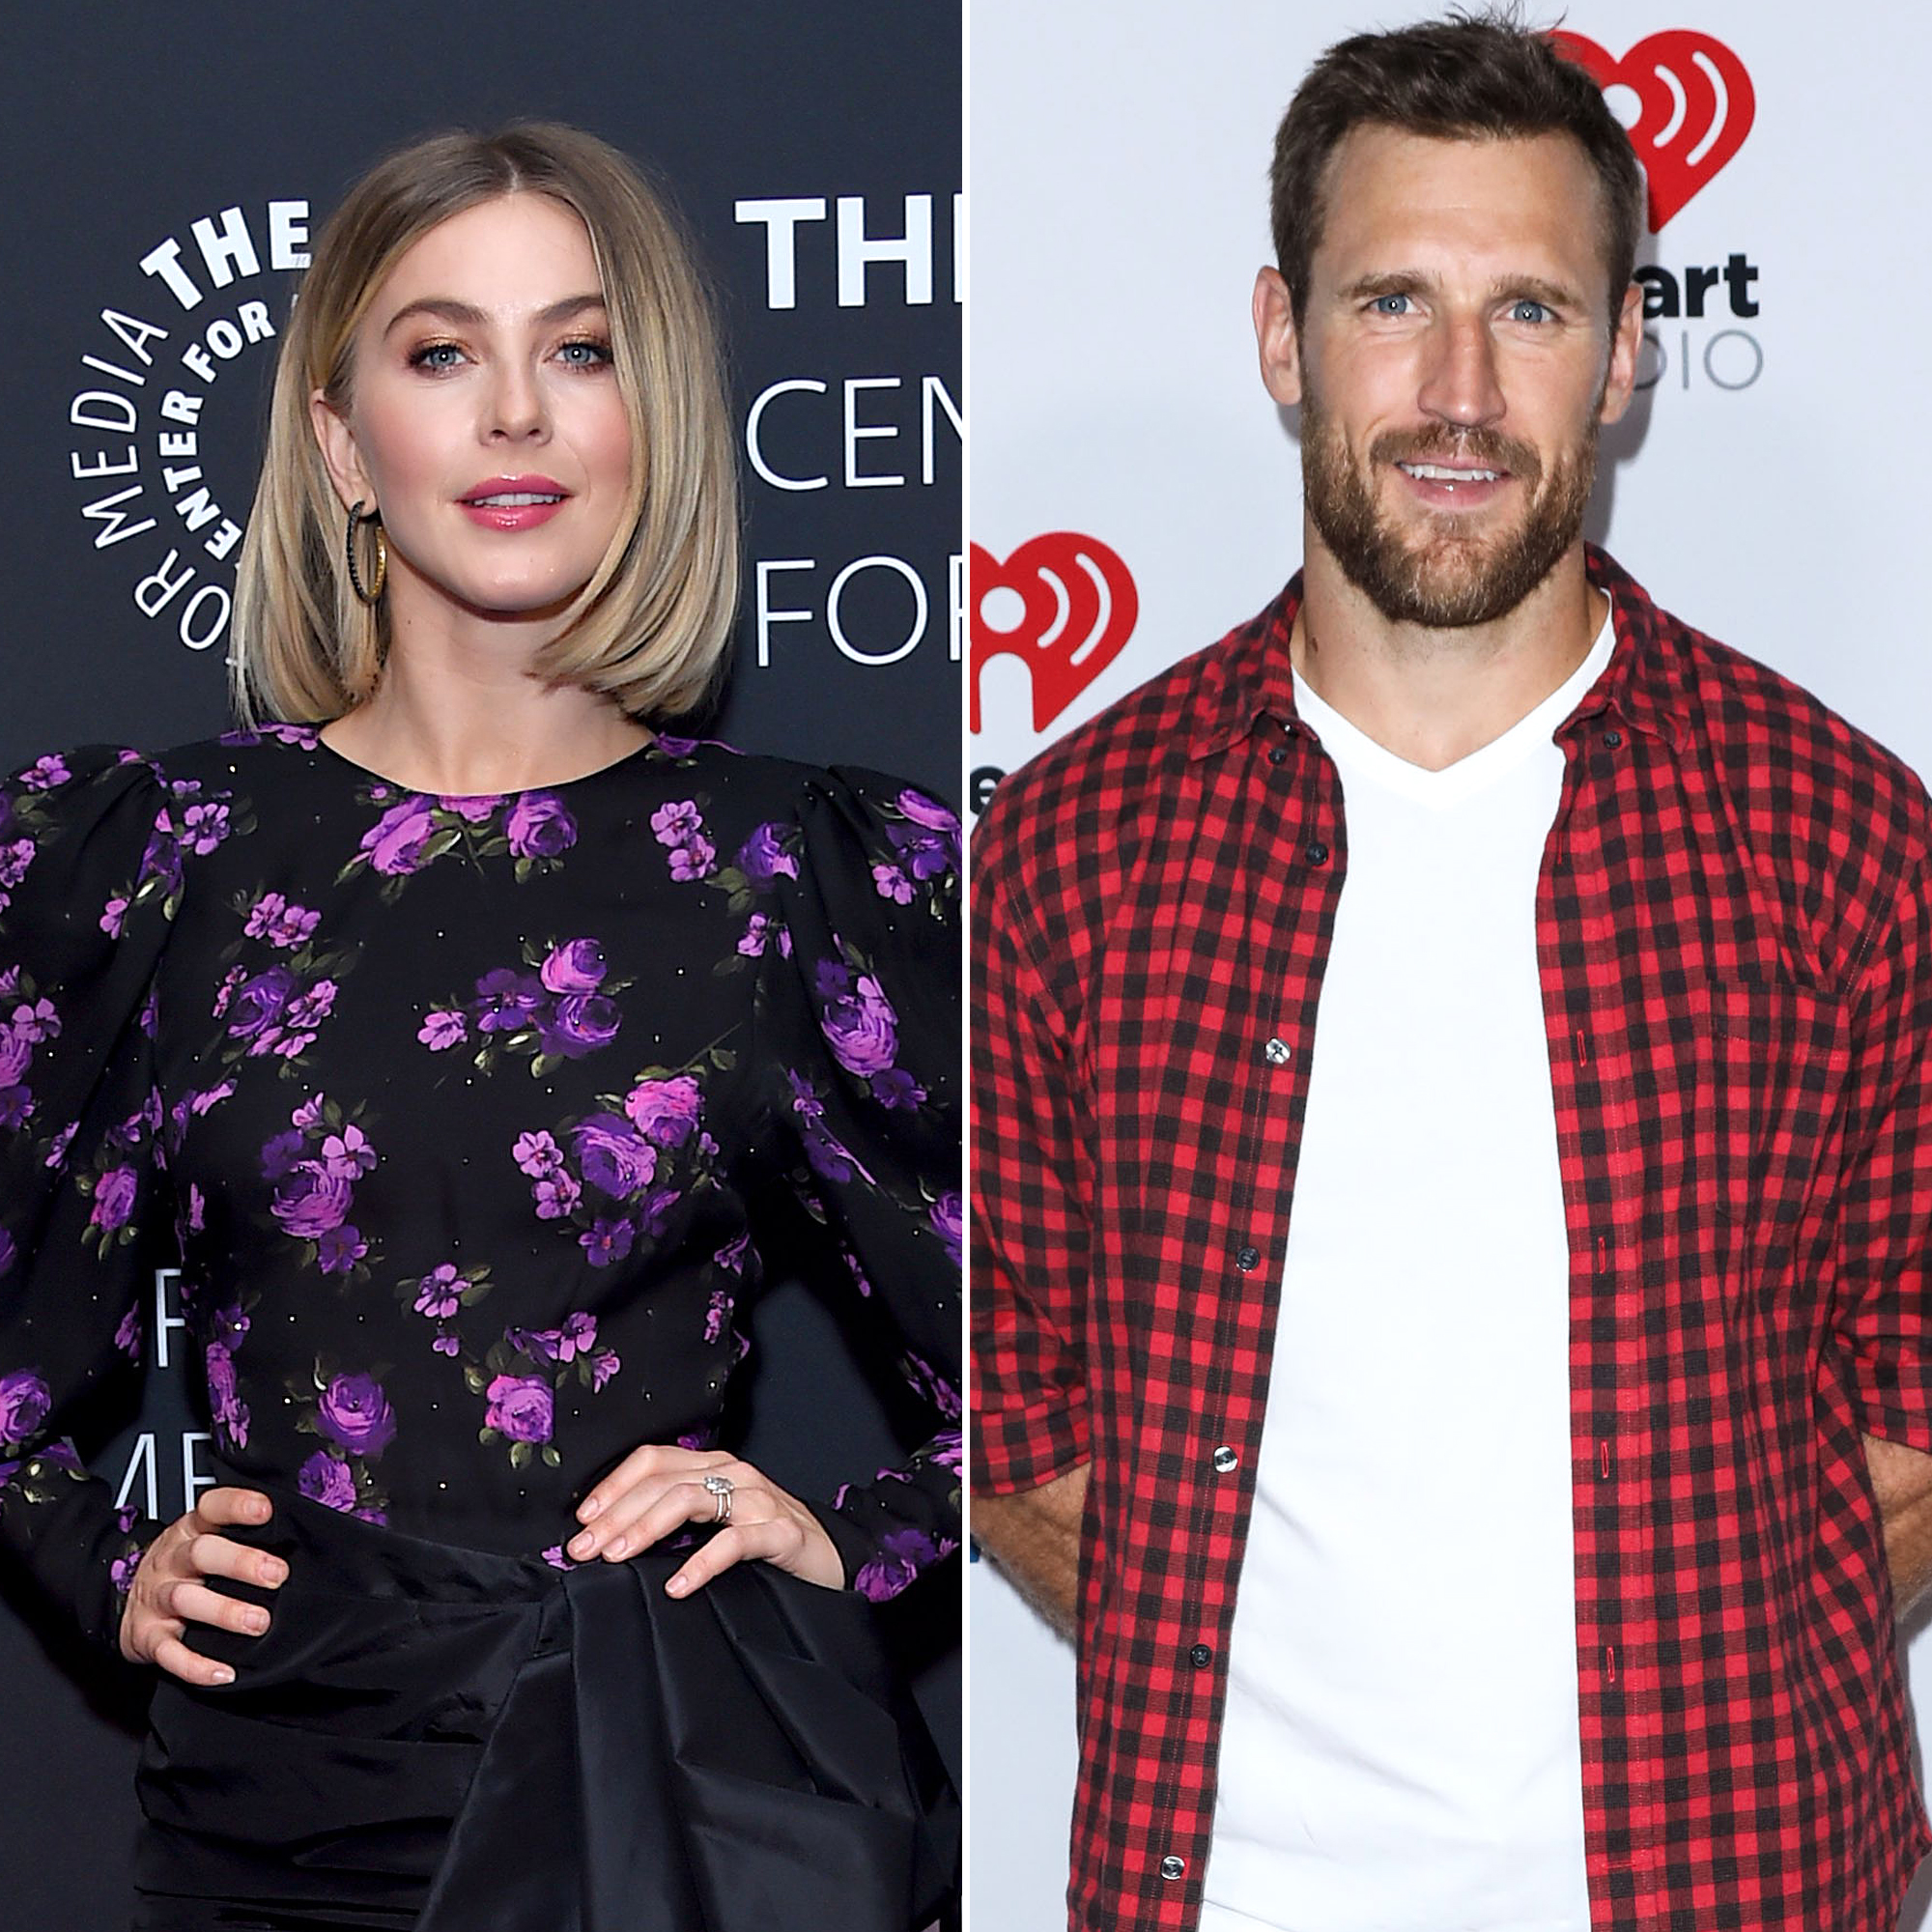 Julianne Hough and Brooks Laich Reunite to Vacation at Lake House